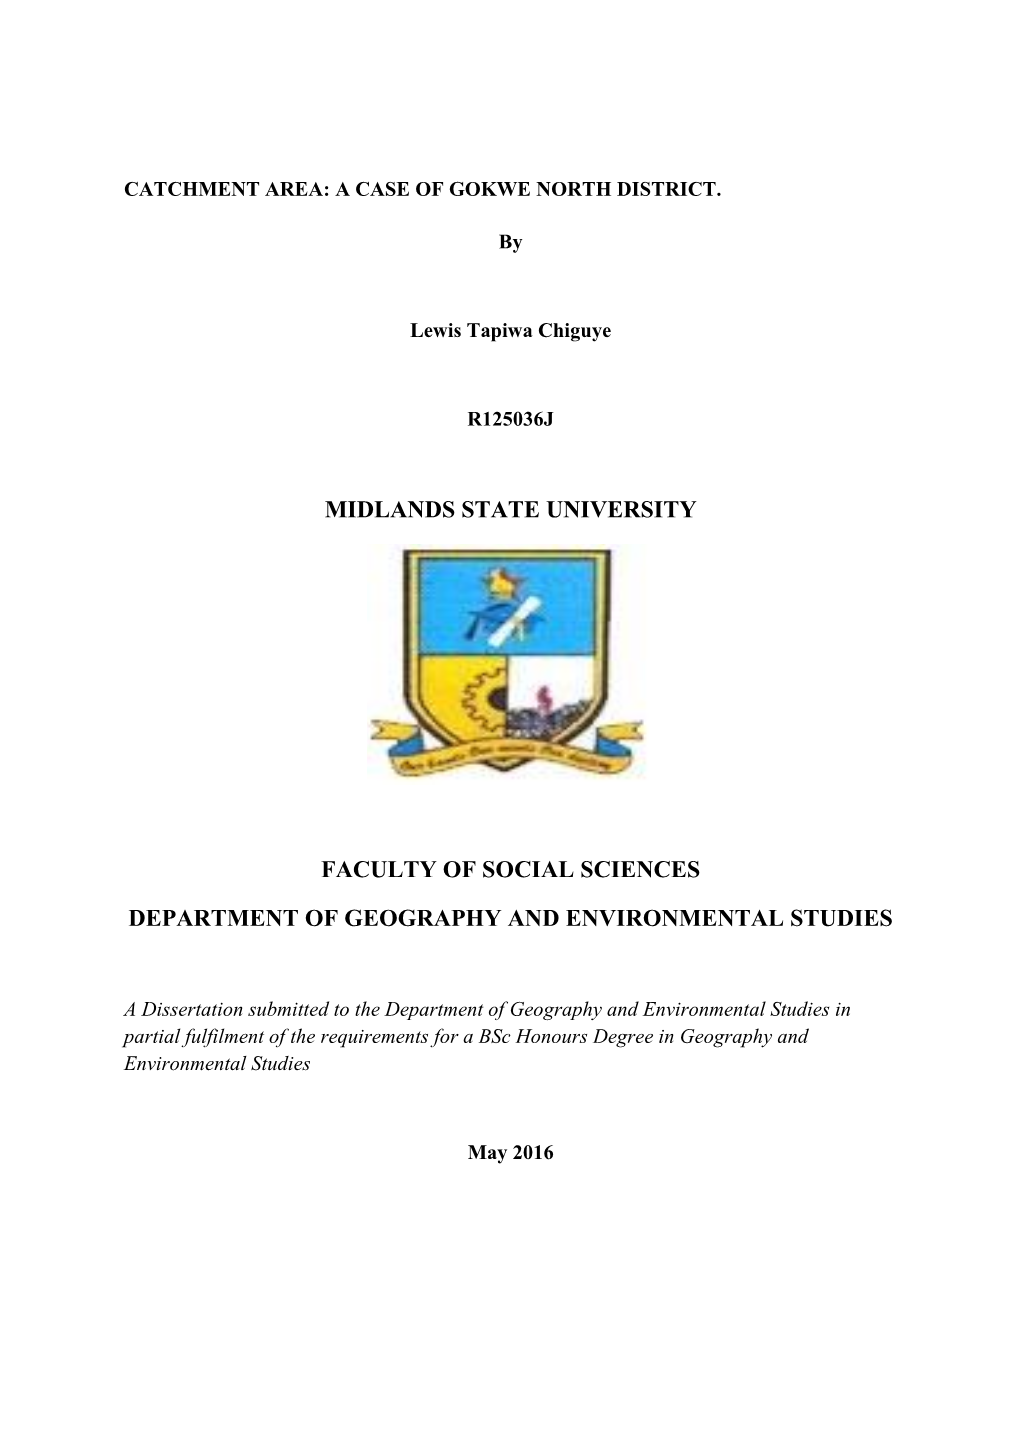 Midlands State University Faculty of Social Sciences